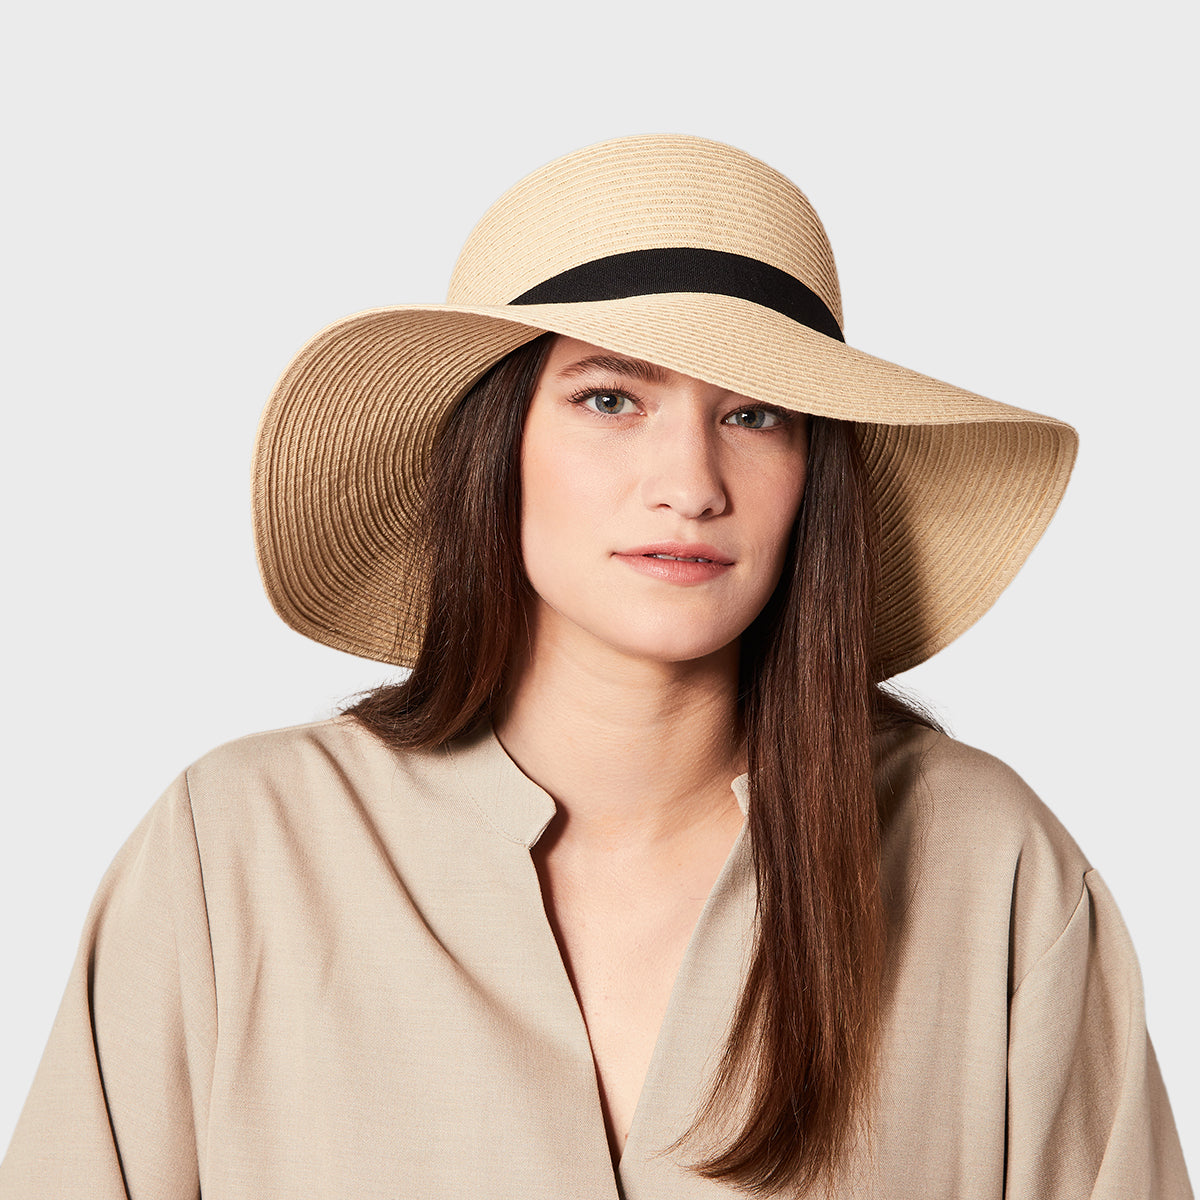 CELMA - FLOPPY HAT WITH RIBBON KNOT